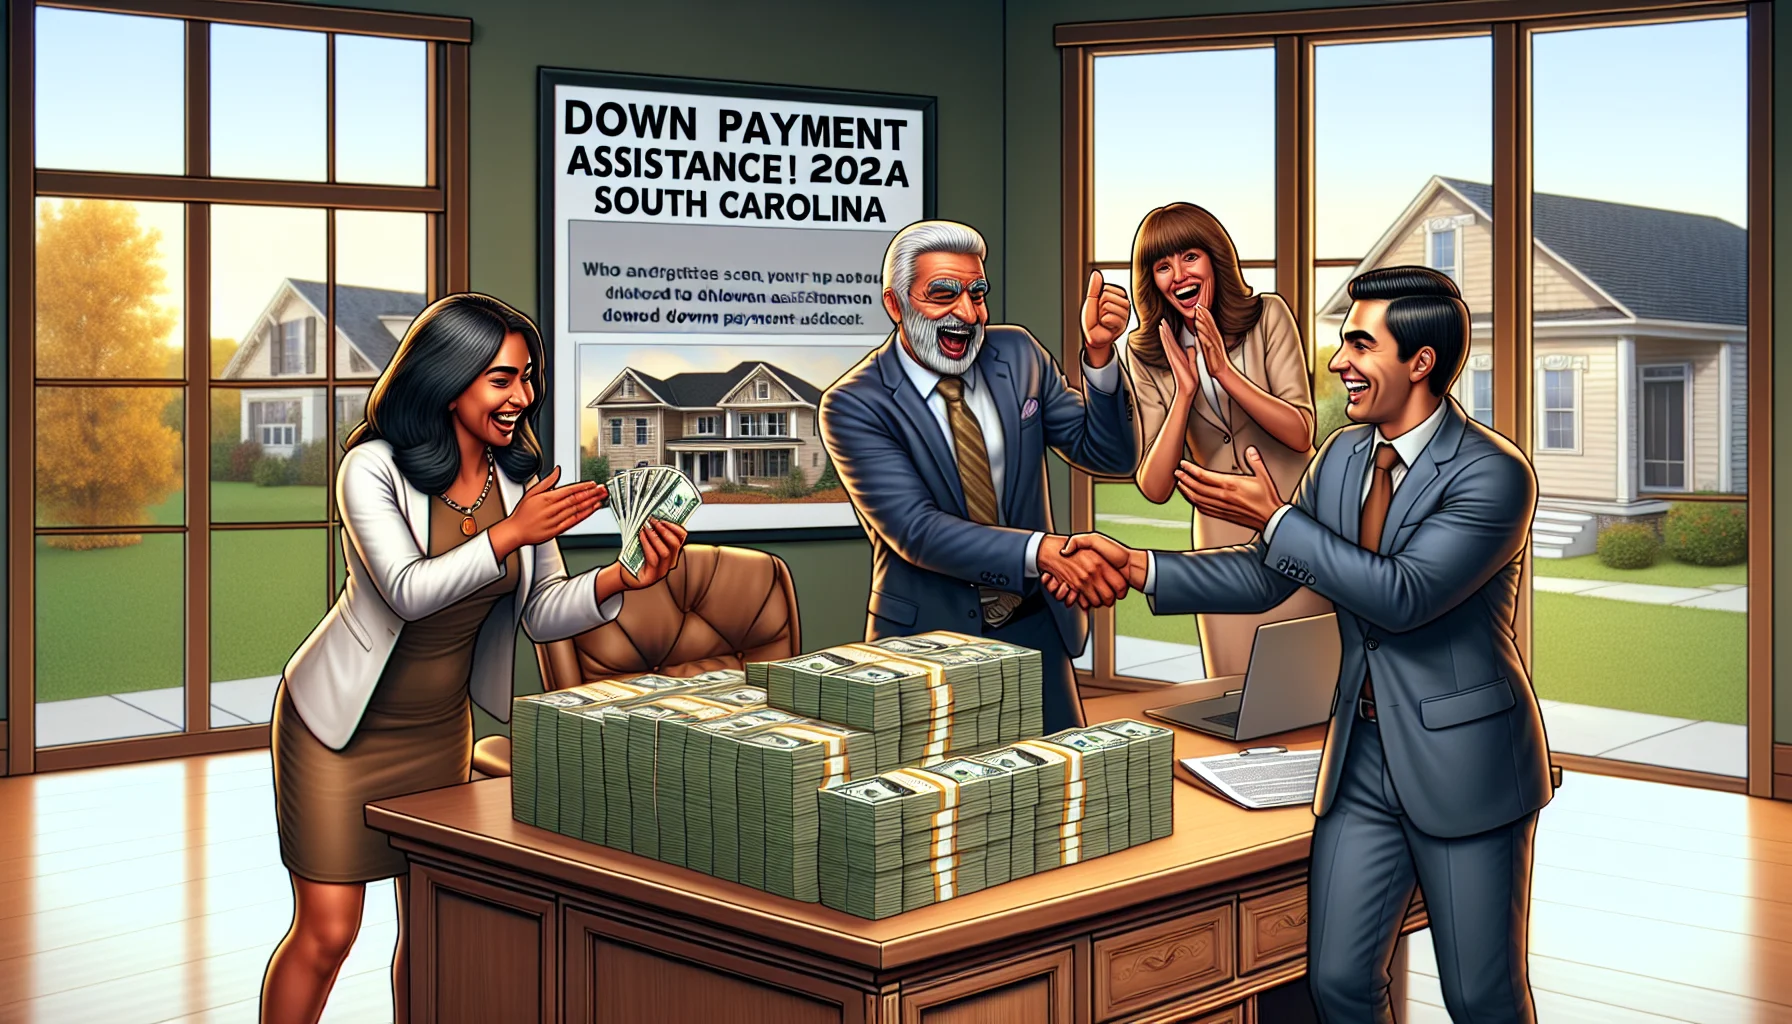 Imagine a humorous, realistic scene depicting the perfect scenario for down payment assistance in South Carolina, 2022. In the scene, a young Hispanic woman, a seasoned Middle-Eastern real estate agent, and an enthusiastic South Asian banker are all celebrating in a tastefully decorated office. The desk is topped with a neatly stacked pile of $15,000 in cash. On the wall, there is a large sign that reads 'Down Payment Assistance Program 2022'. A handshake is taking place between the woman and banker, with the real estate agent applauding in the background. The expressions on their faces indicate relief, joy, and success. Simultaneously, outside of the window, you can see a beautiful house that is just within reach thanks to the generous down payment assistance.